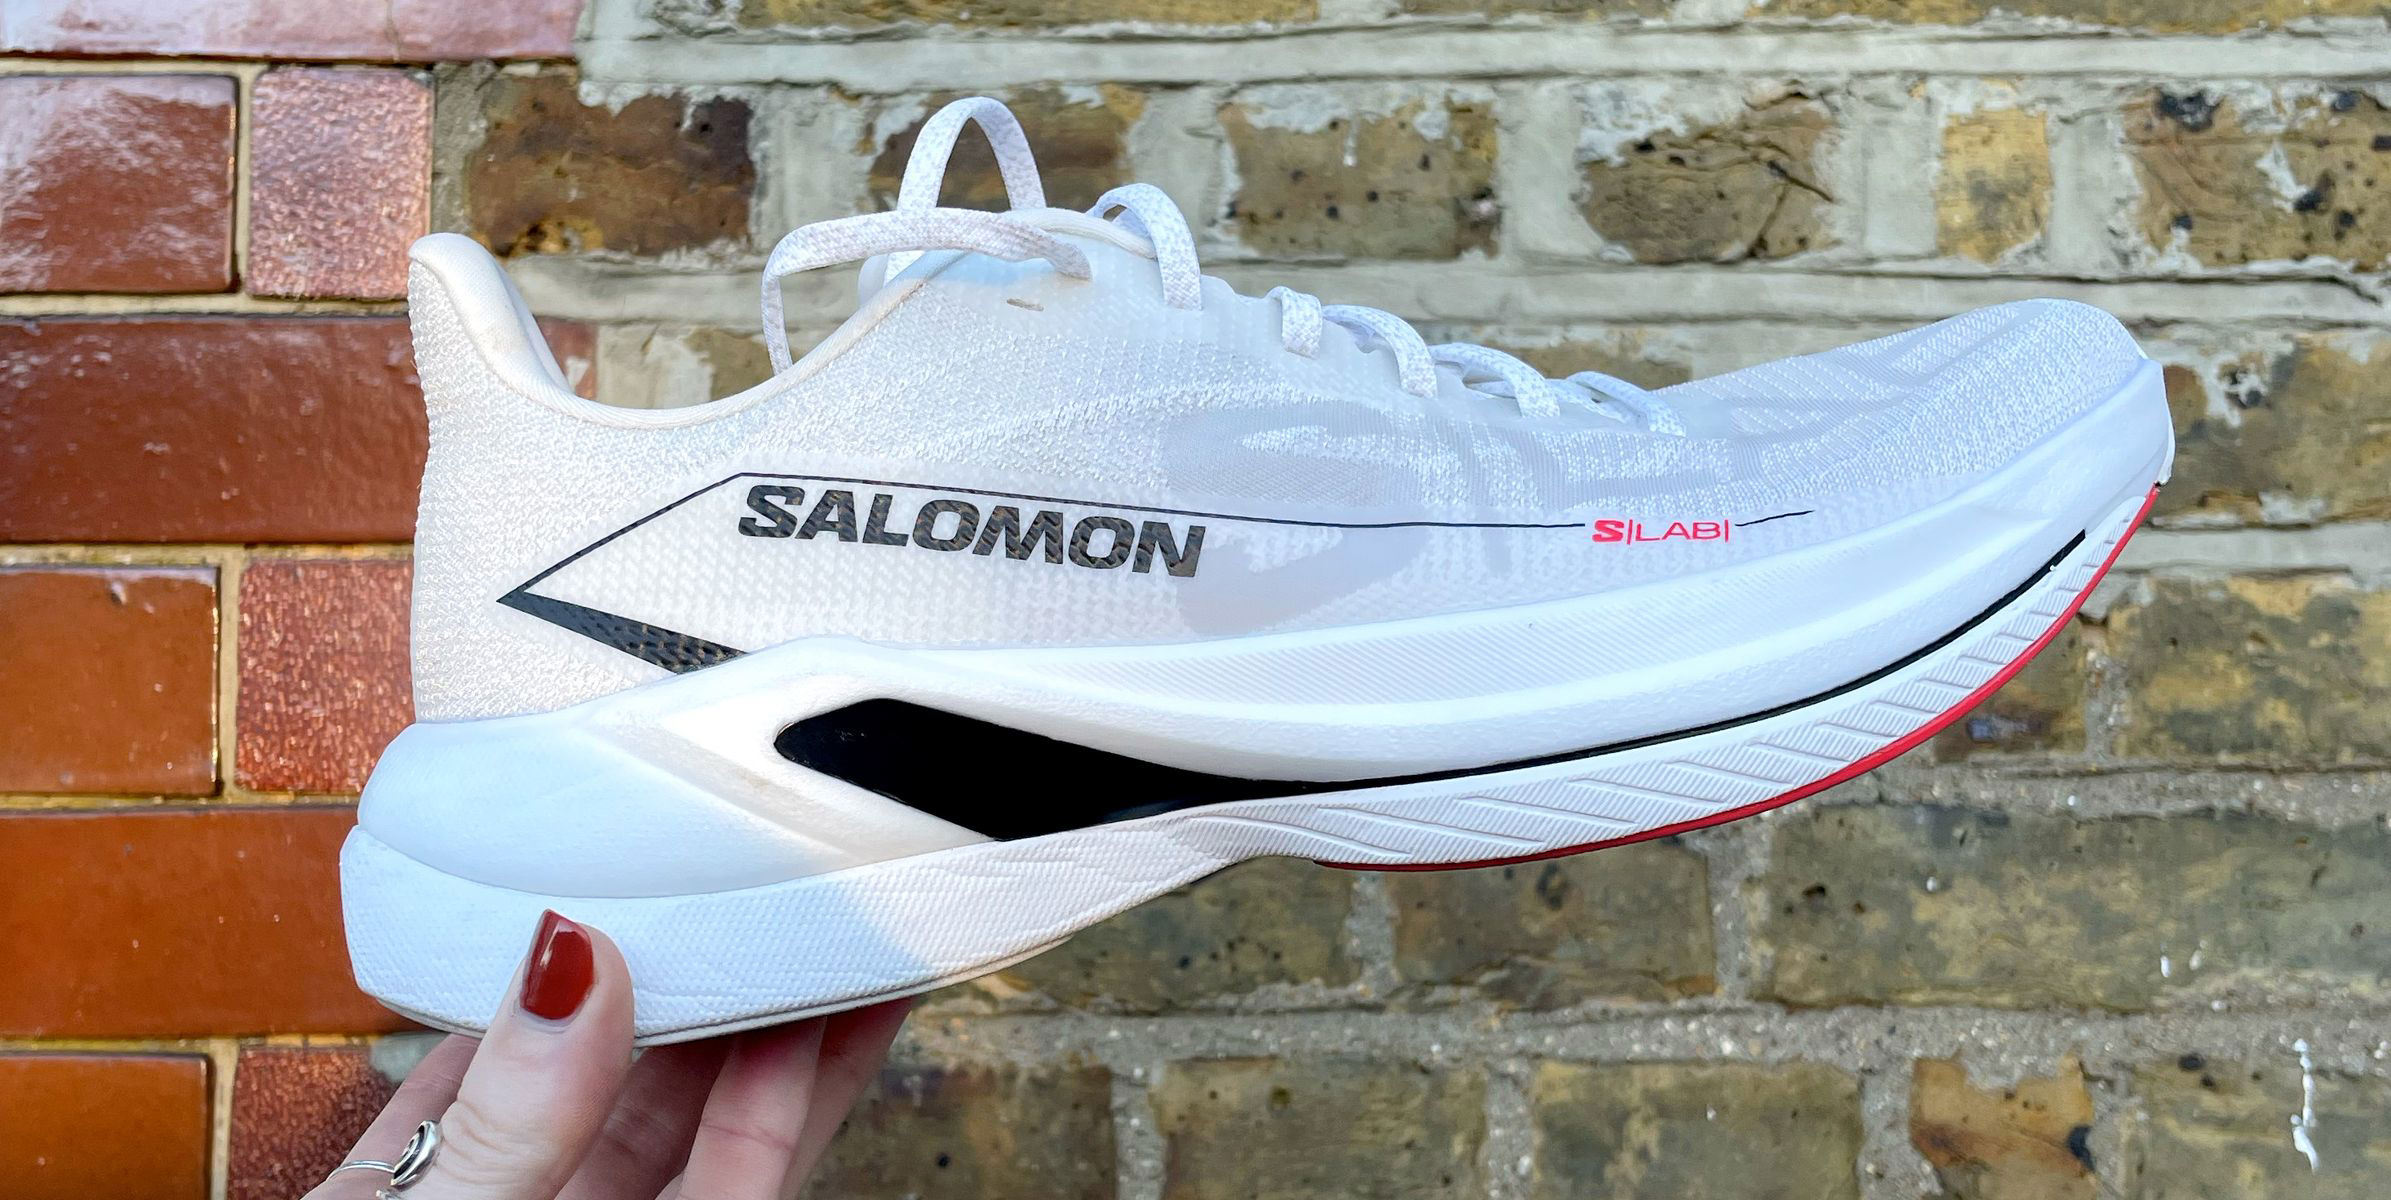 Salomon S/Lab Spectur: Tried and tested